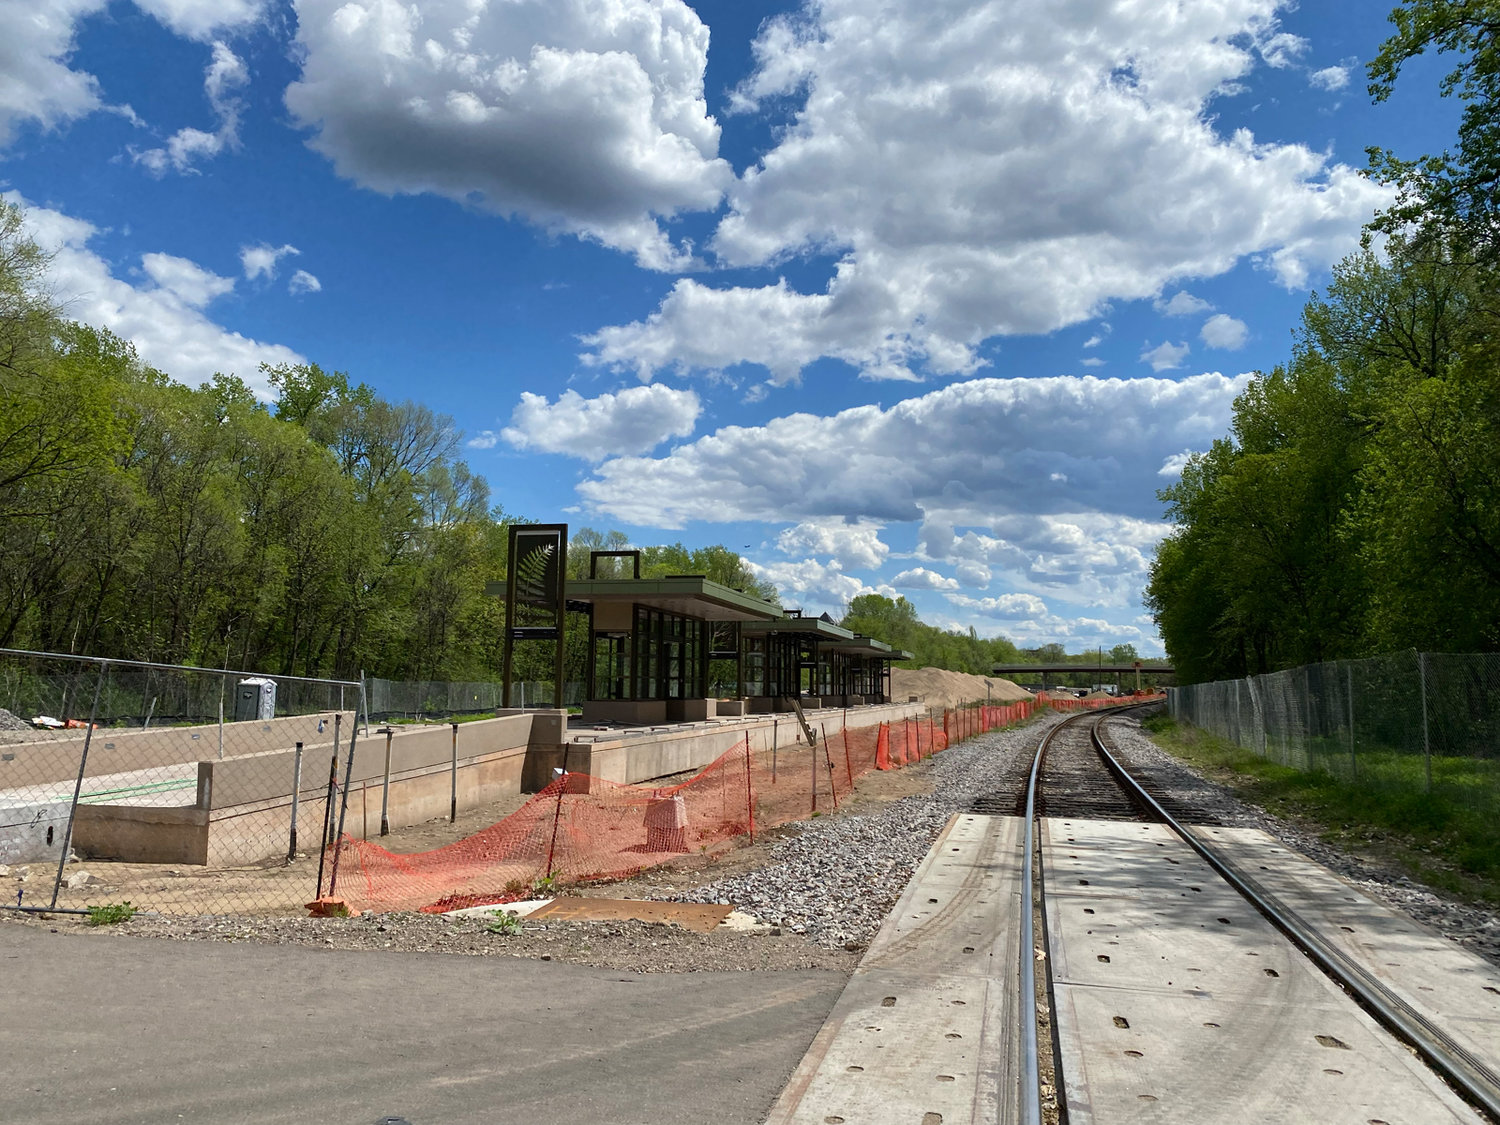 The Kenilworth Trail will remain closed until the completion of the LRT tunnel construction sometime in 2025. A detour is posted. On Monday, May 23, the long-term closure of Cedar Lake Parkway begins. It will last through spring 2023 while the Kenilworth tunnel is constructed. Pumps and generators will be running periodically overnight to manage water.